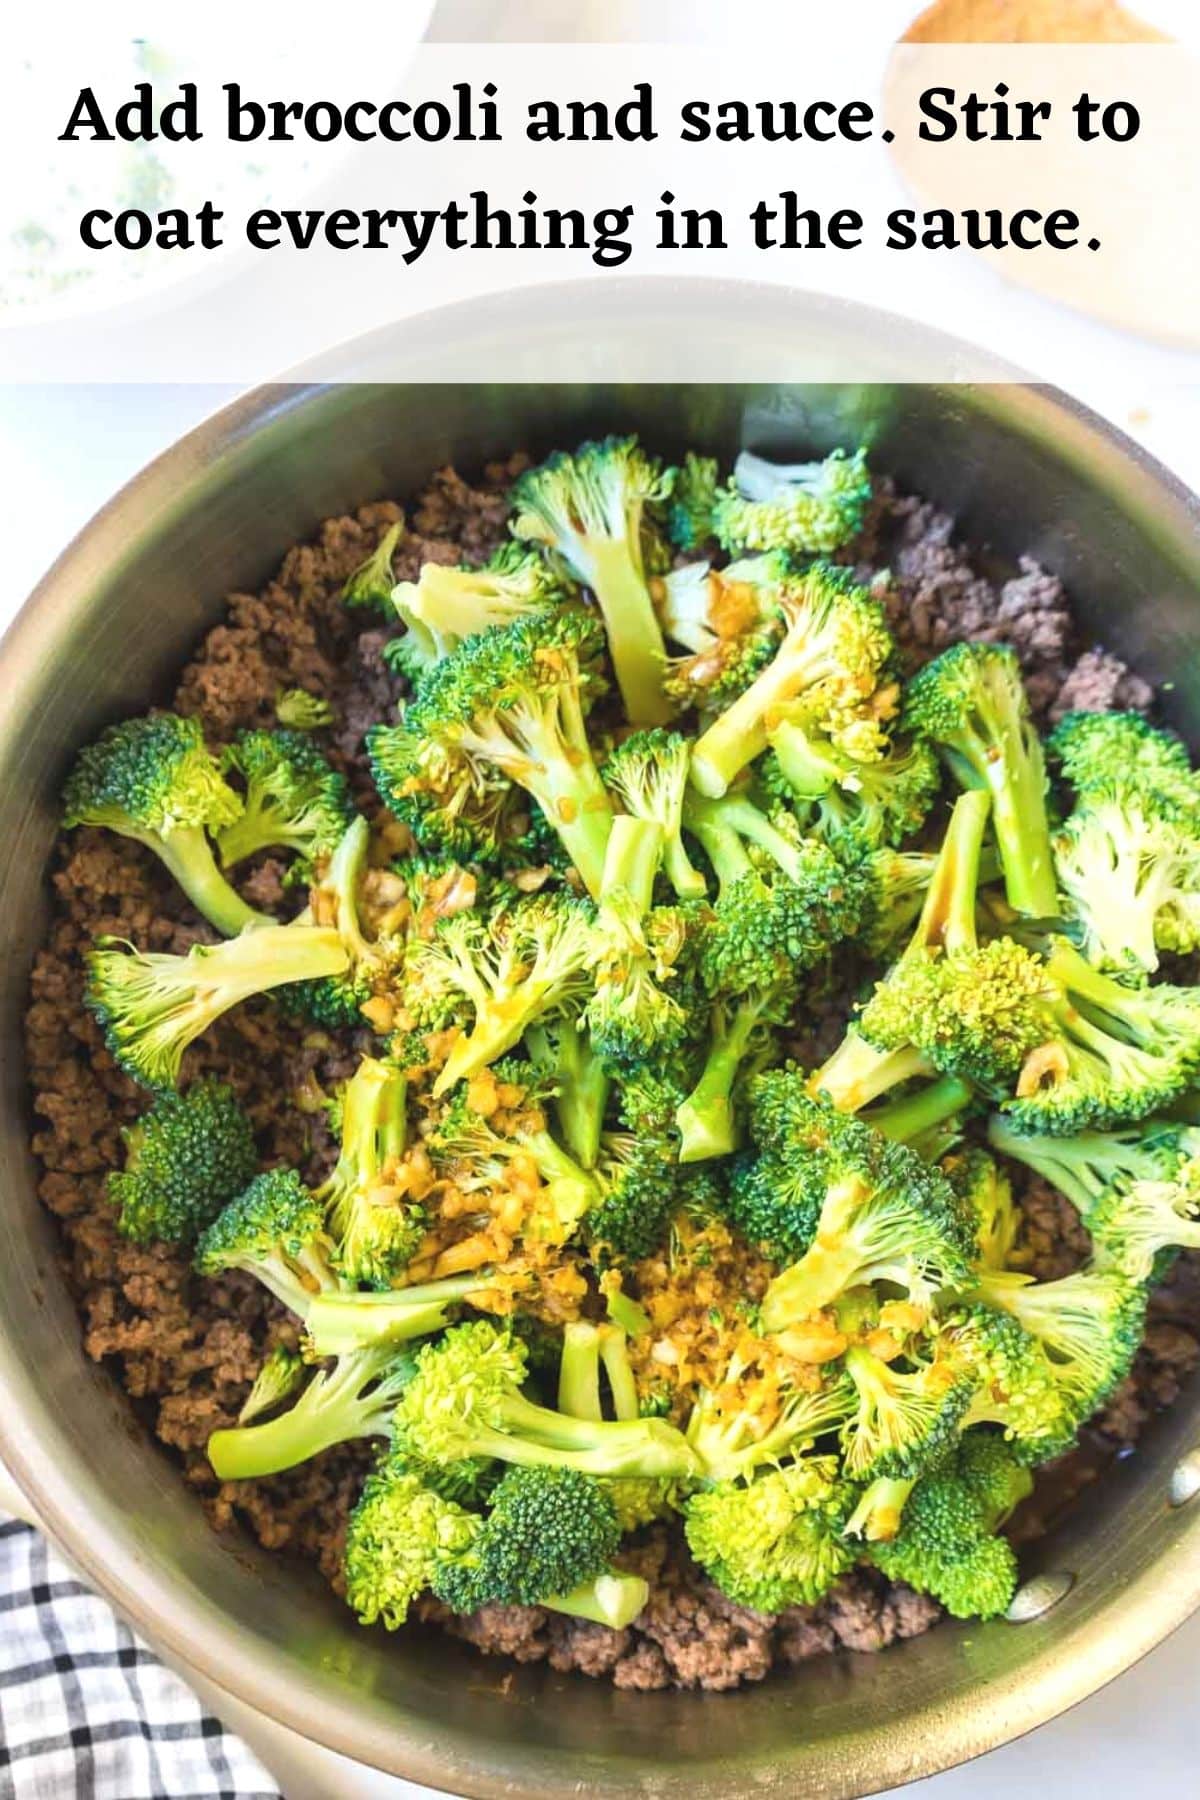 Ground beef and broccoli with sauce being added.